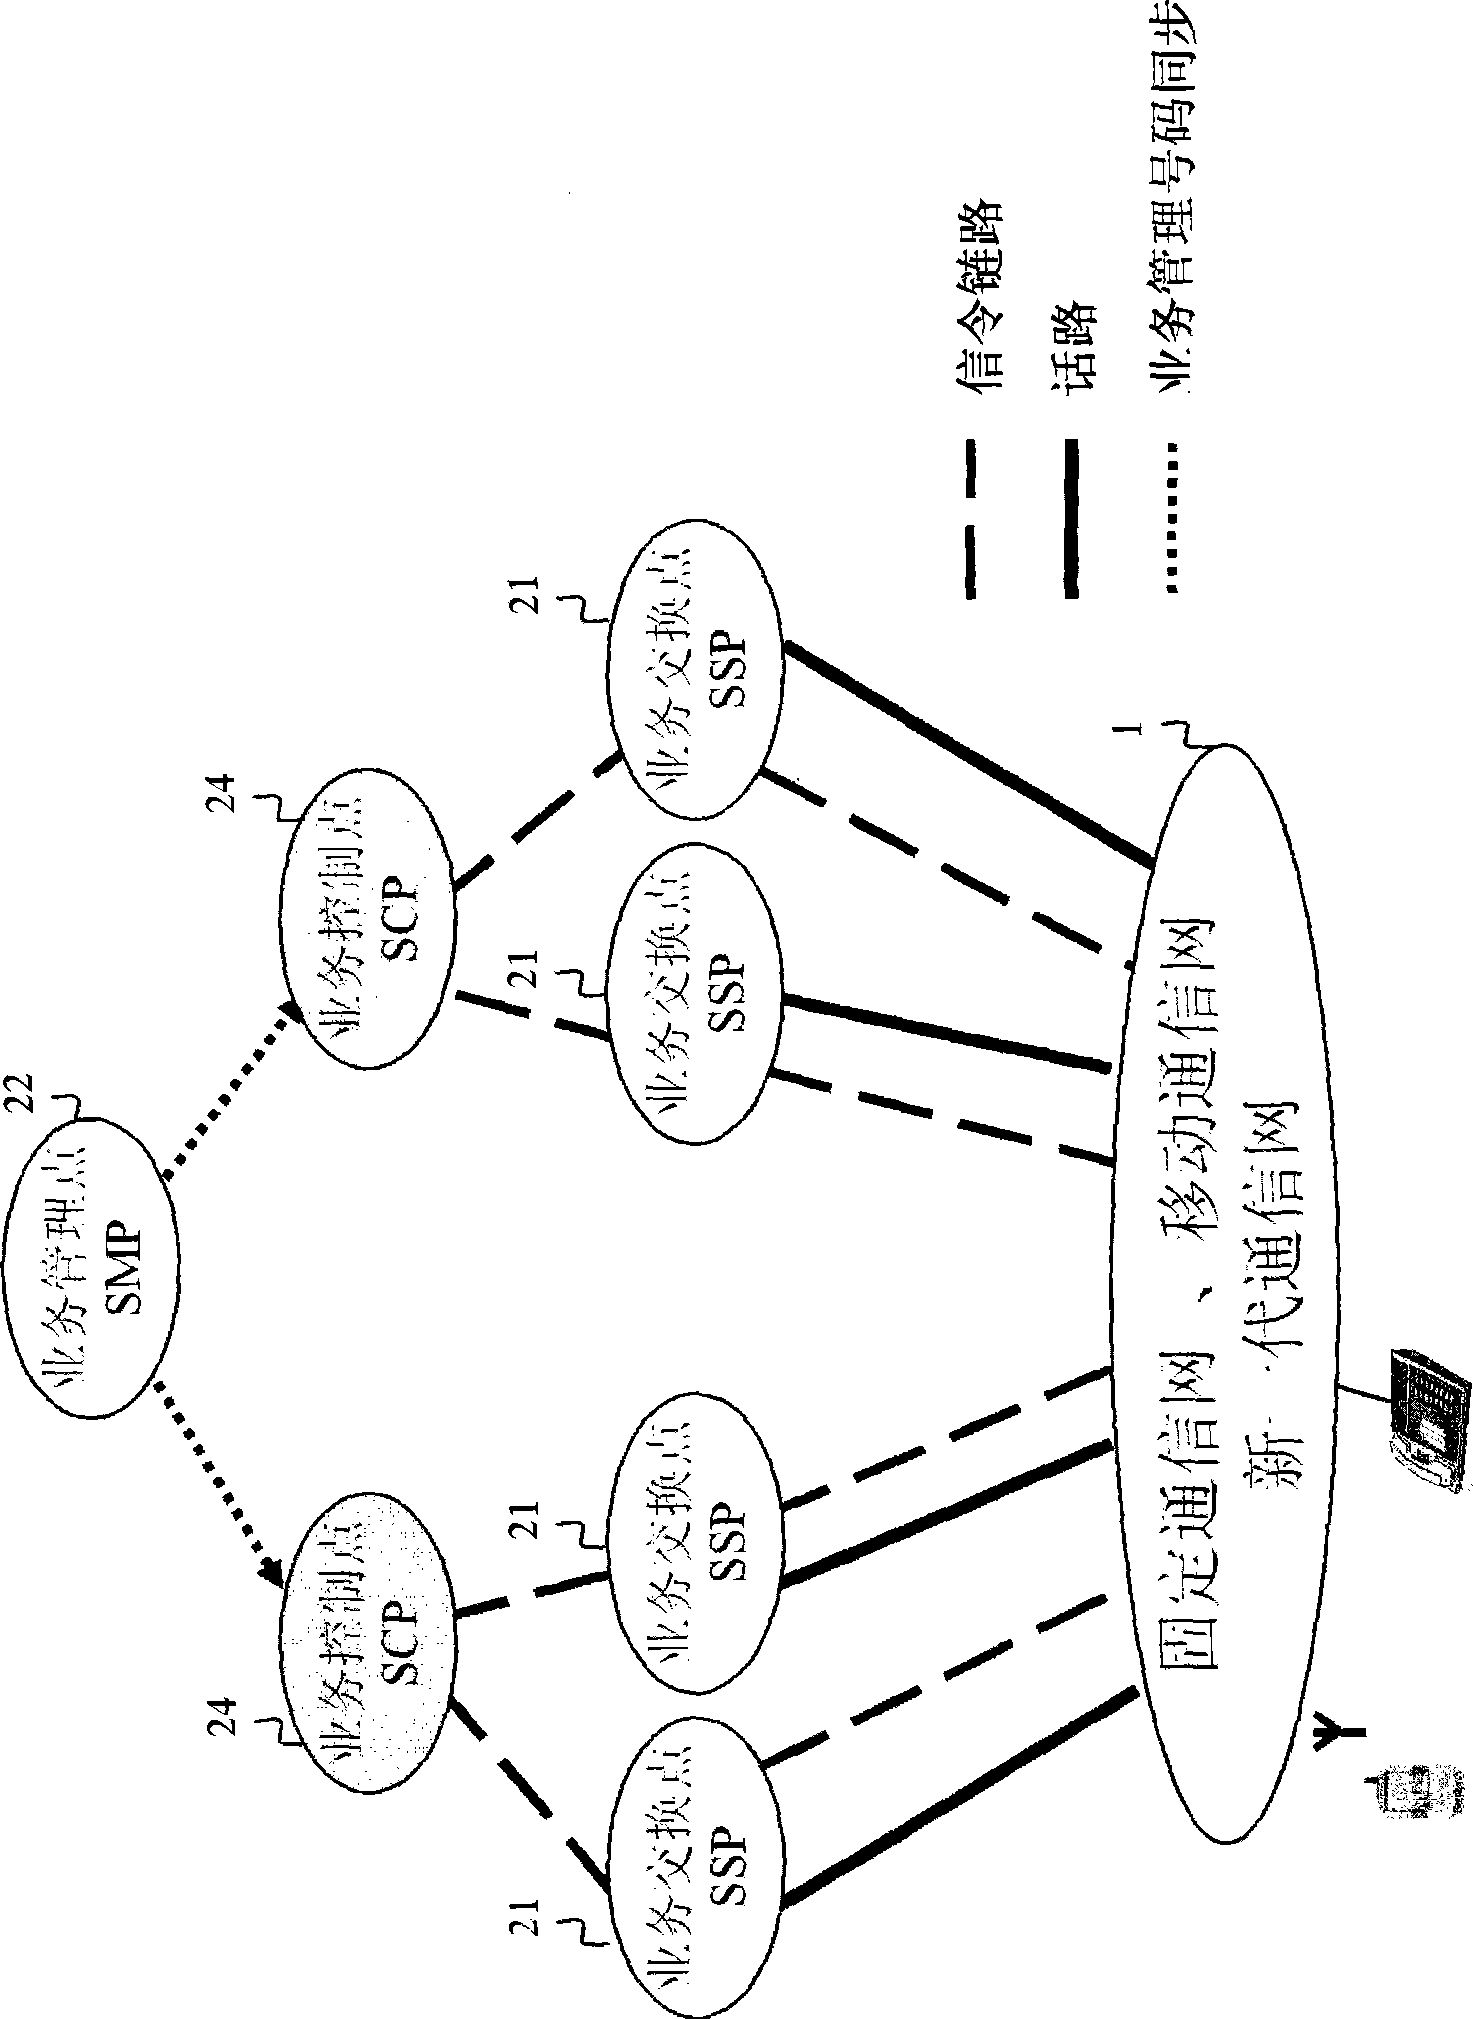 Method for implementing prepositive logic personalized telecom value added business